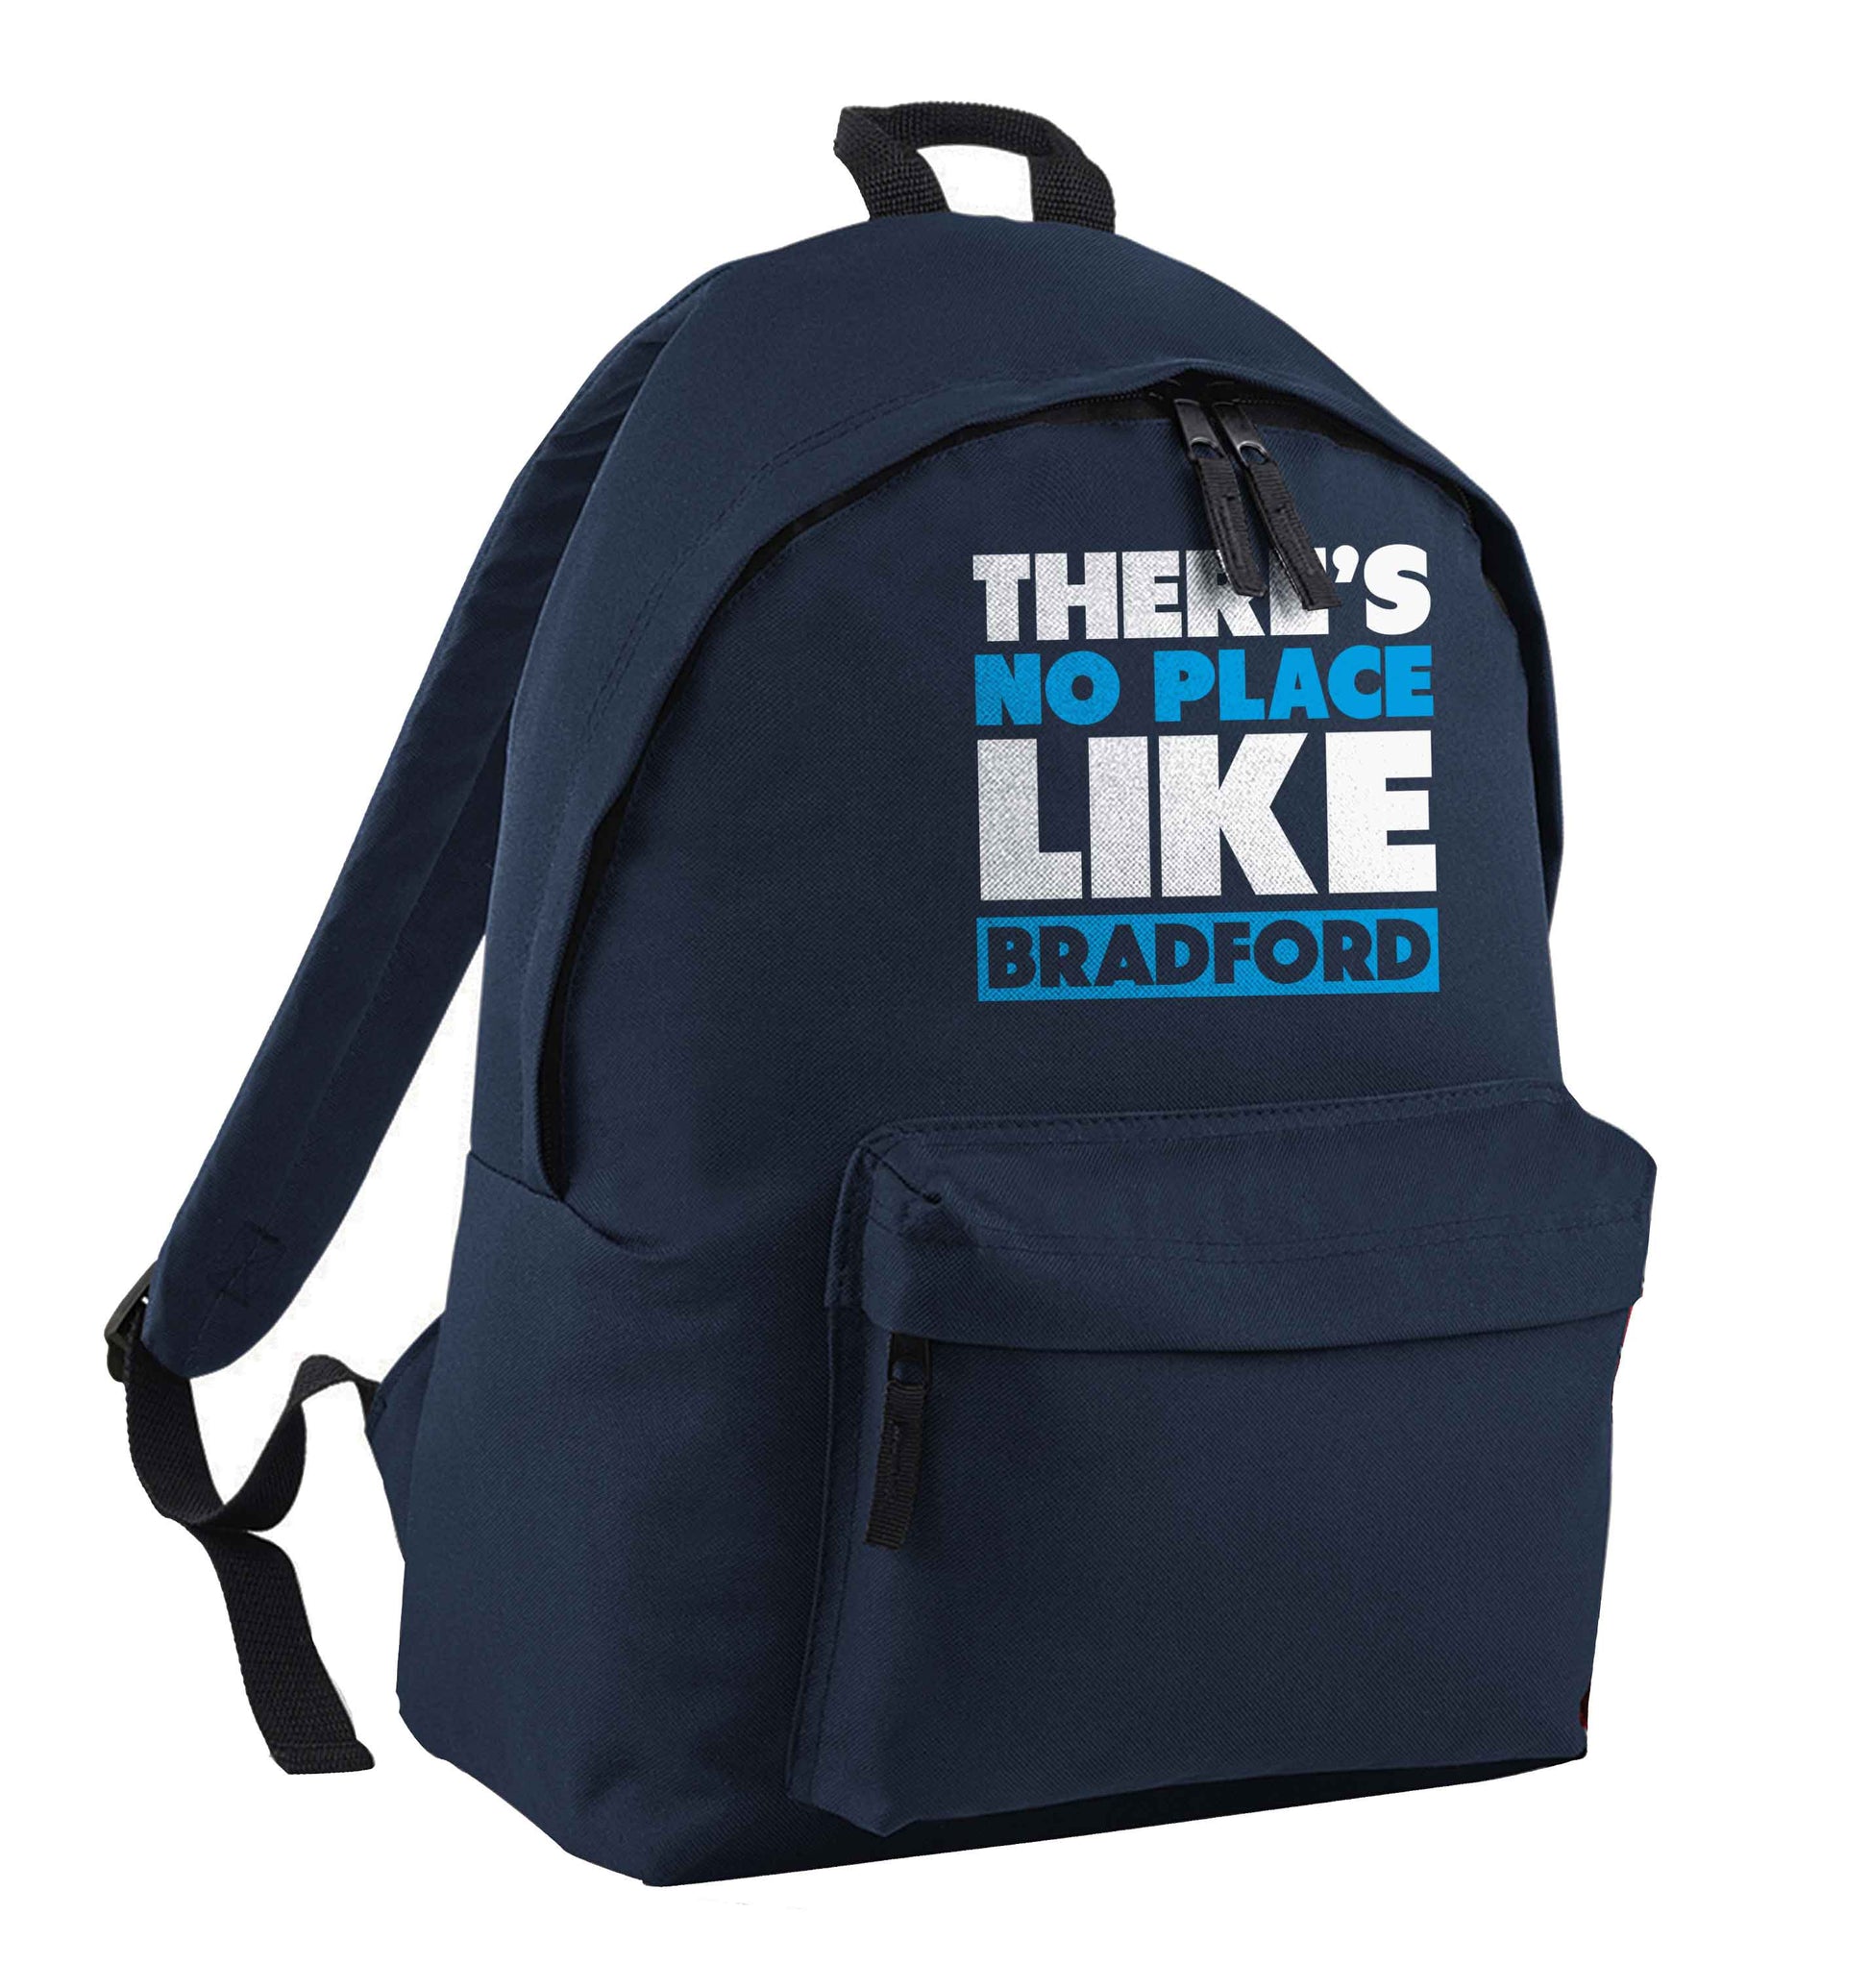 There's no place like Bradford navy adults backpack